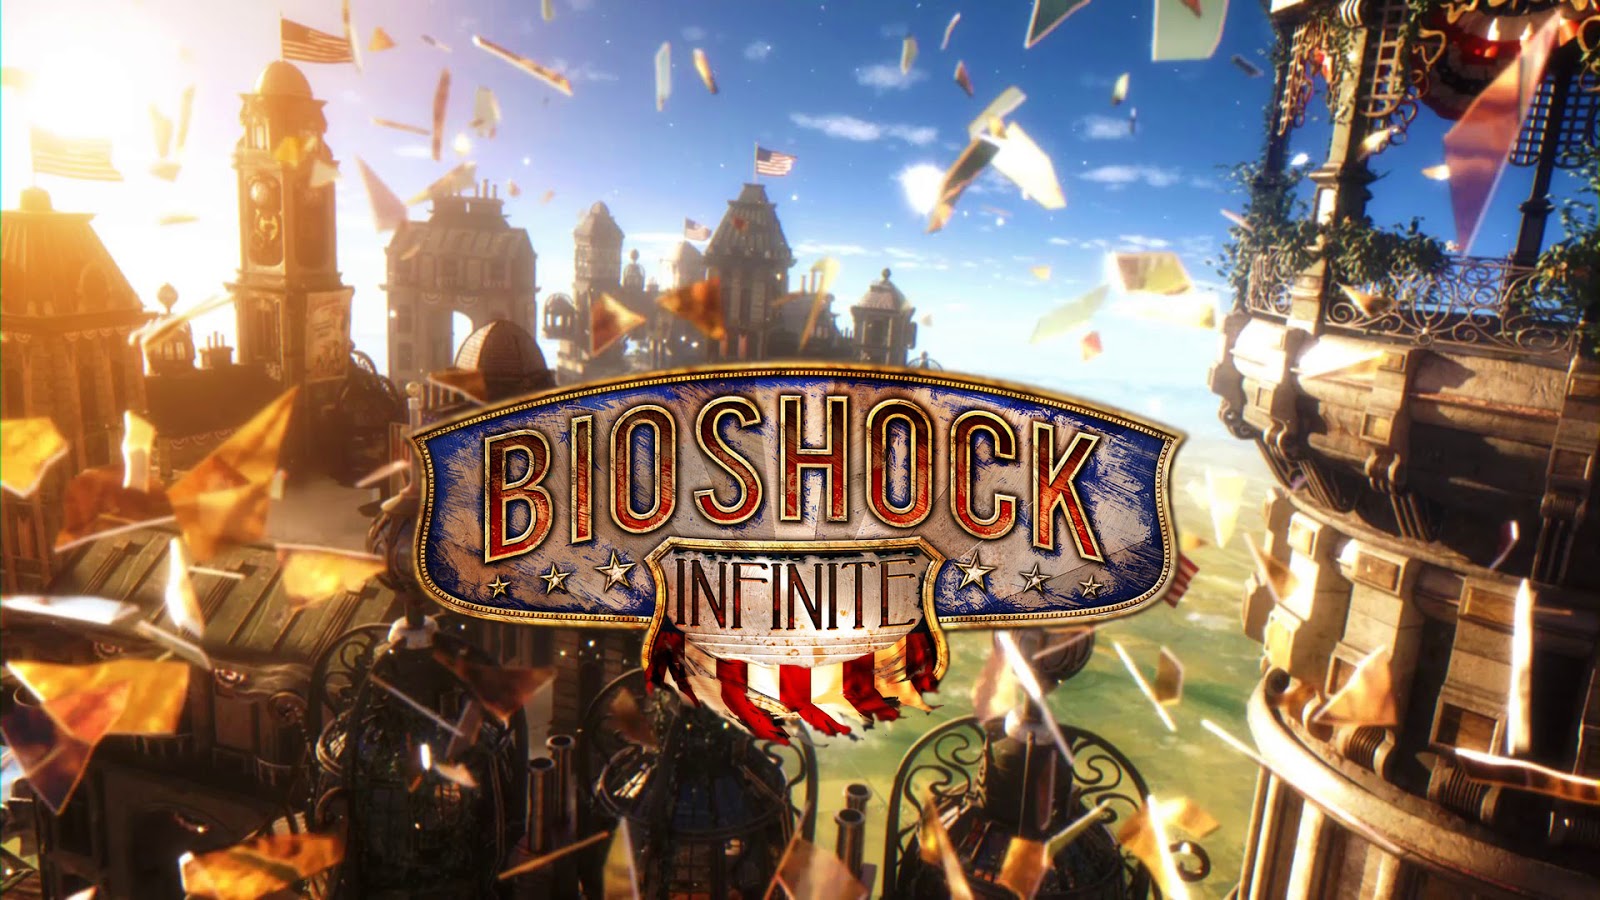 Game Theory: BioShock Infinite and Video Game Reviews - The New York Times